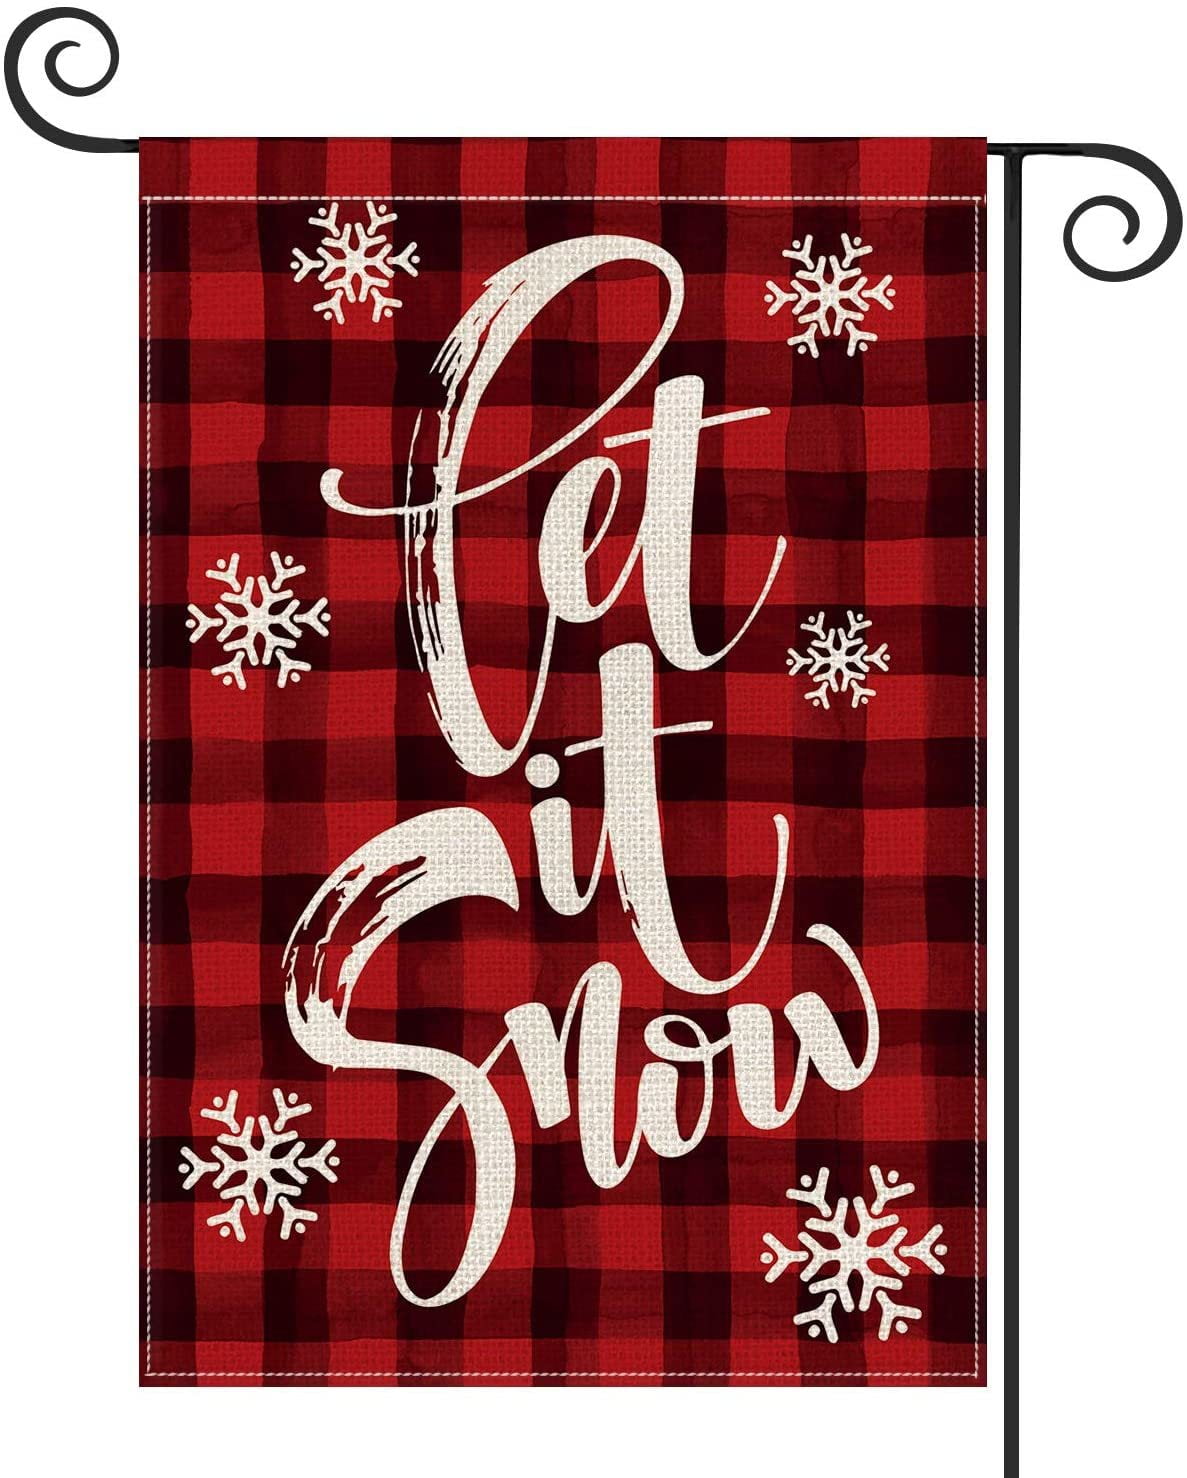 Waldeal Merry Christmas Santa Claus Garden Flag 12 x 18 Inch Flax Vertical Double Sided Buffalo Plaid Winter Welcome Flag for Patio Lawn Yard Outdoor Decor